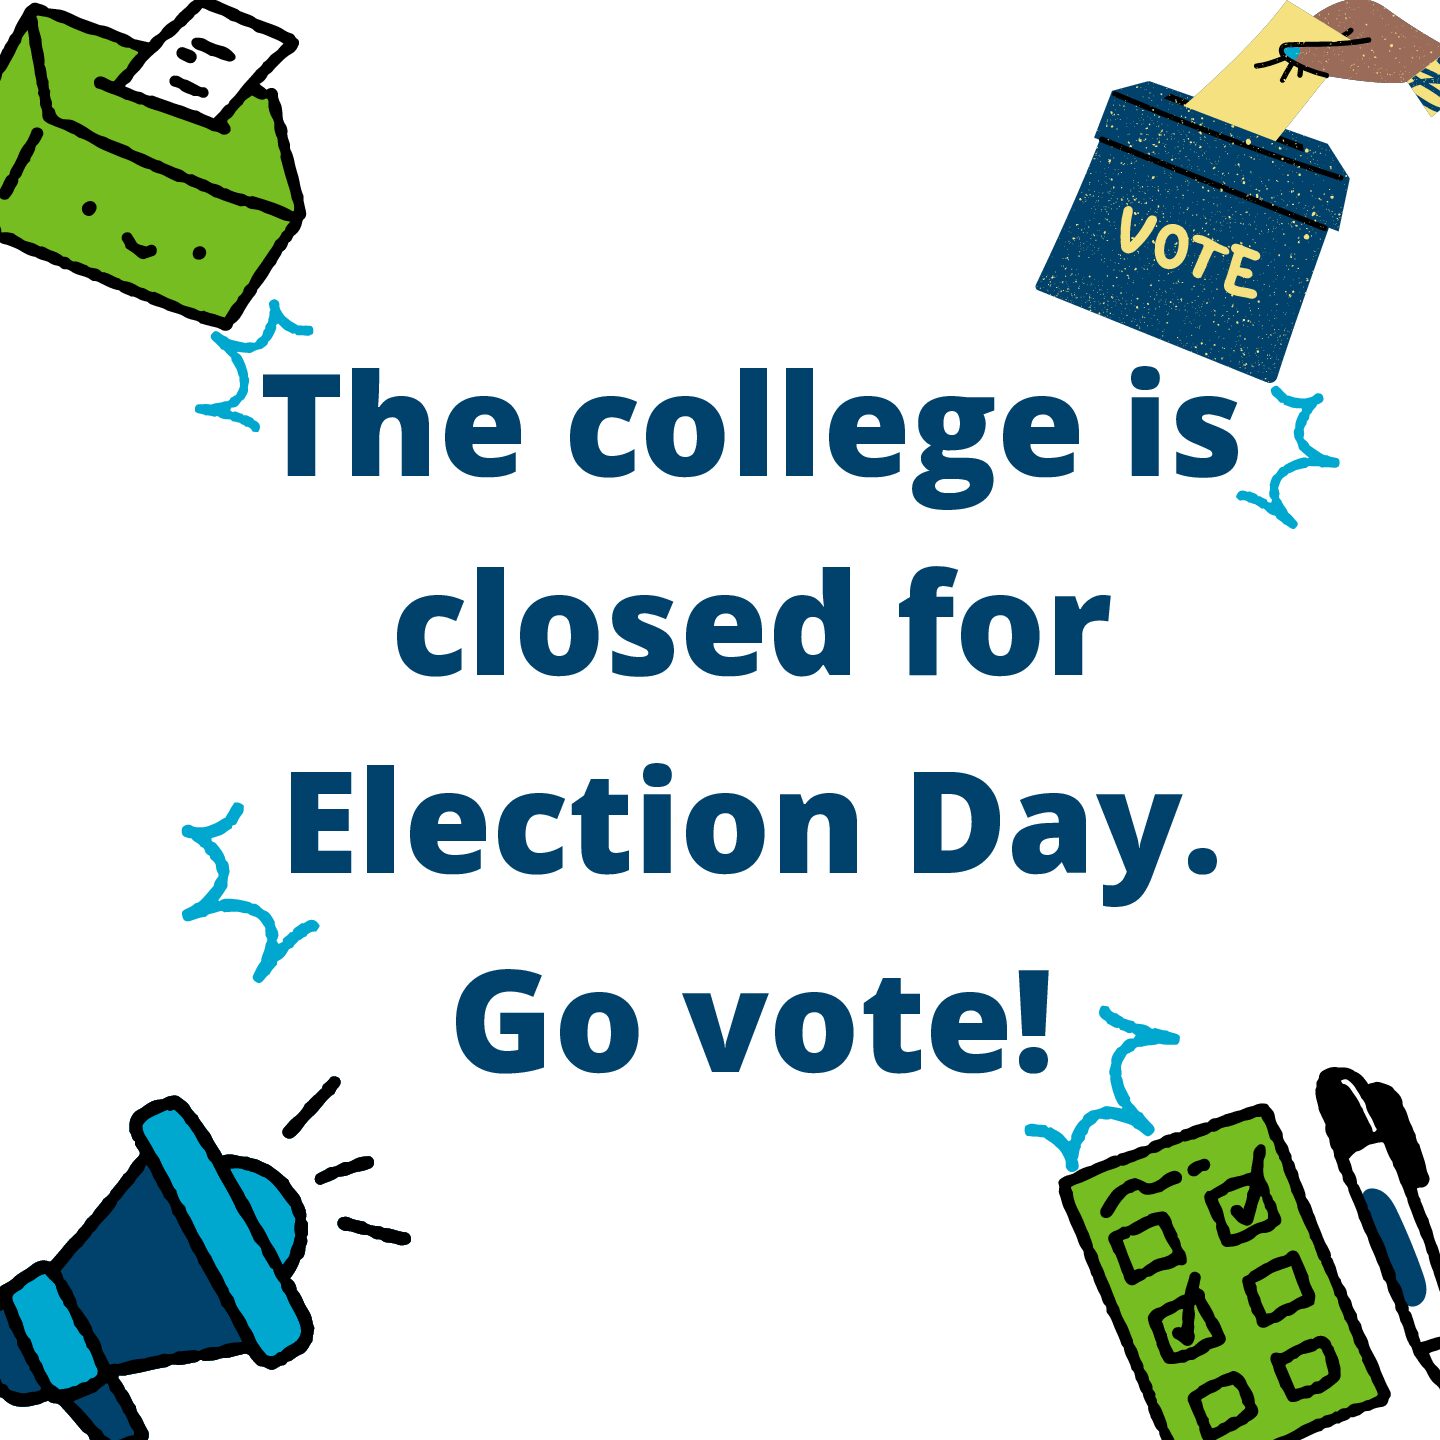 College Closed for Election Day. Go Vote!